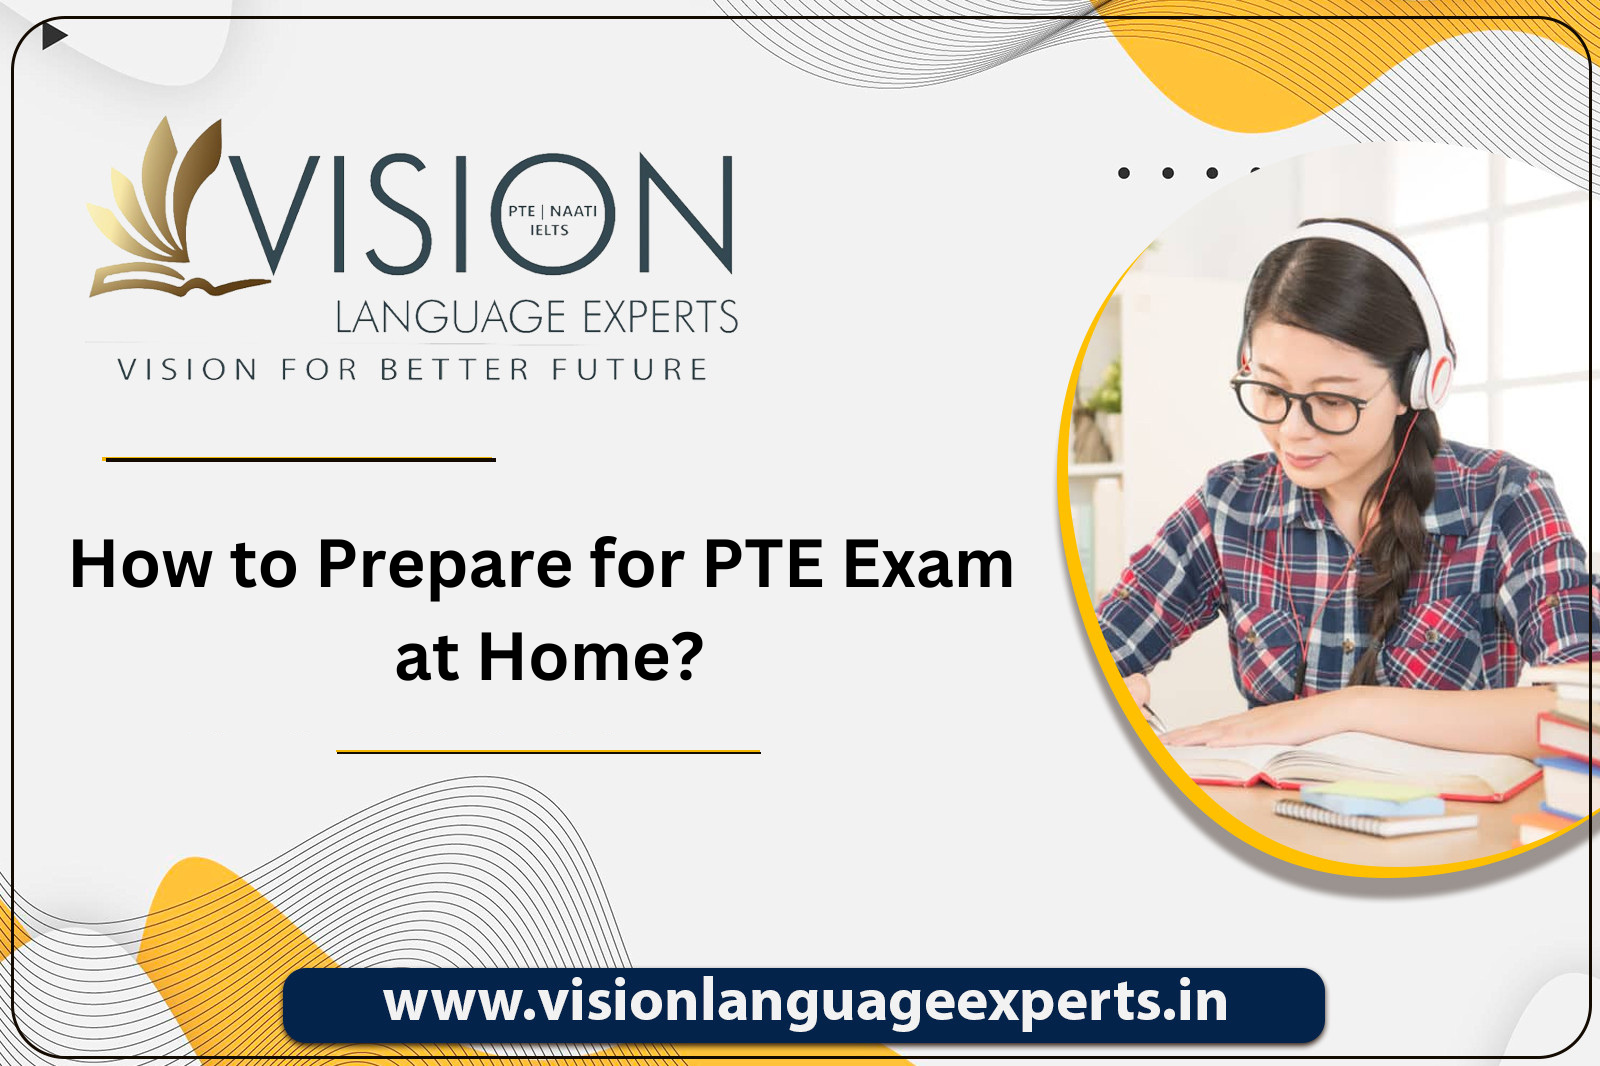 How to Prepare for PTE Exam at Home?